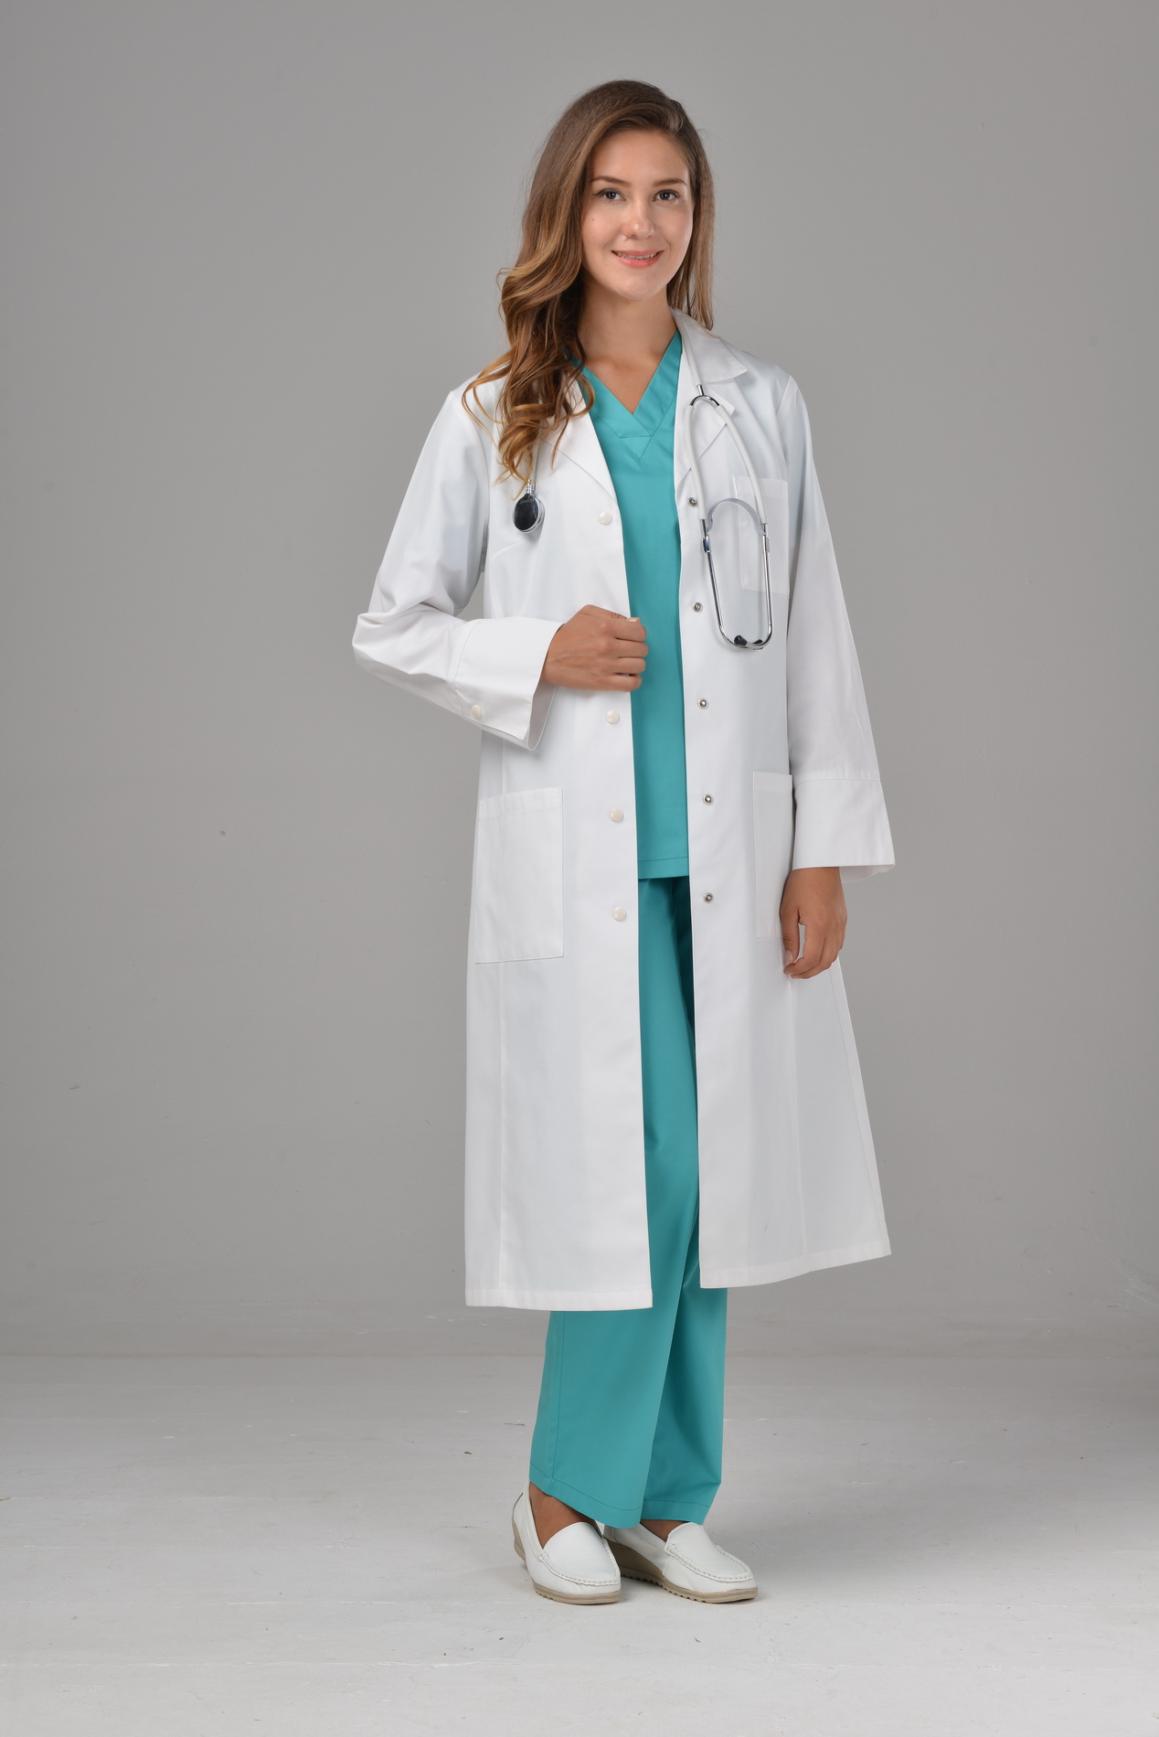 Activewear Fashion Tips For Nurses: How To Look Stylish And Professional